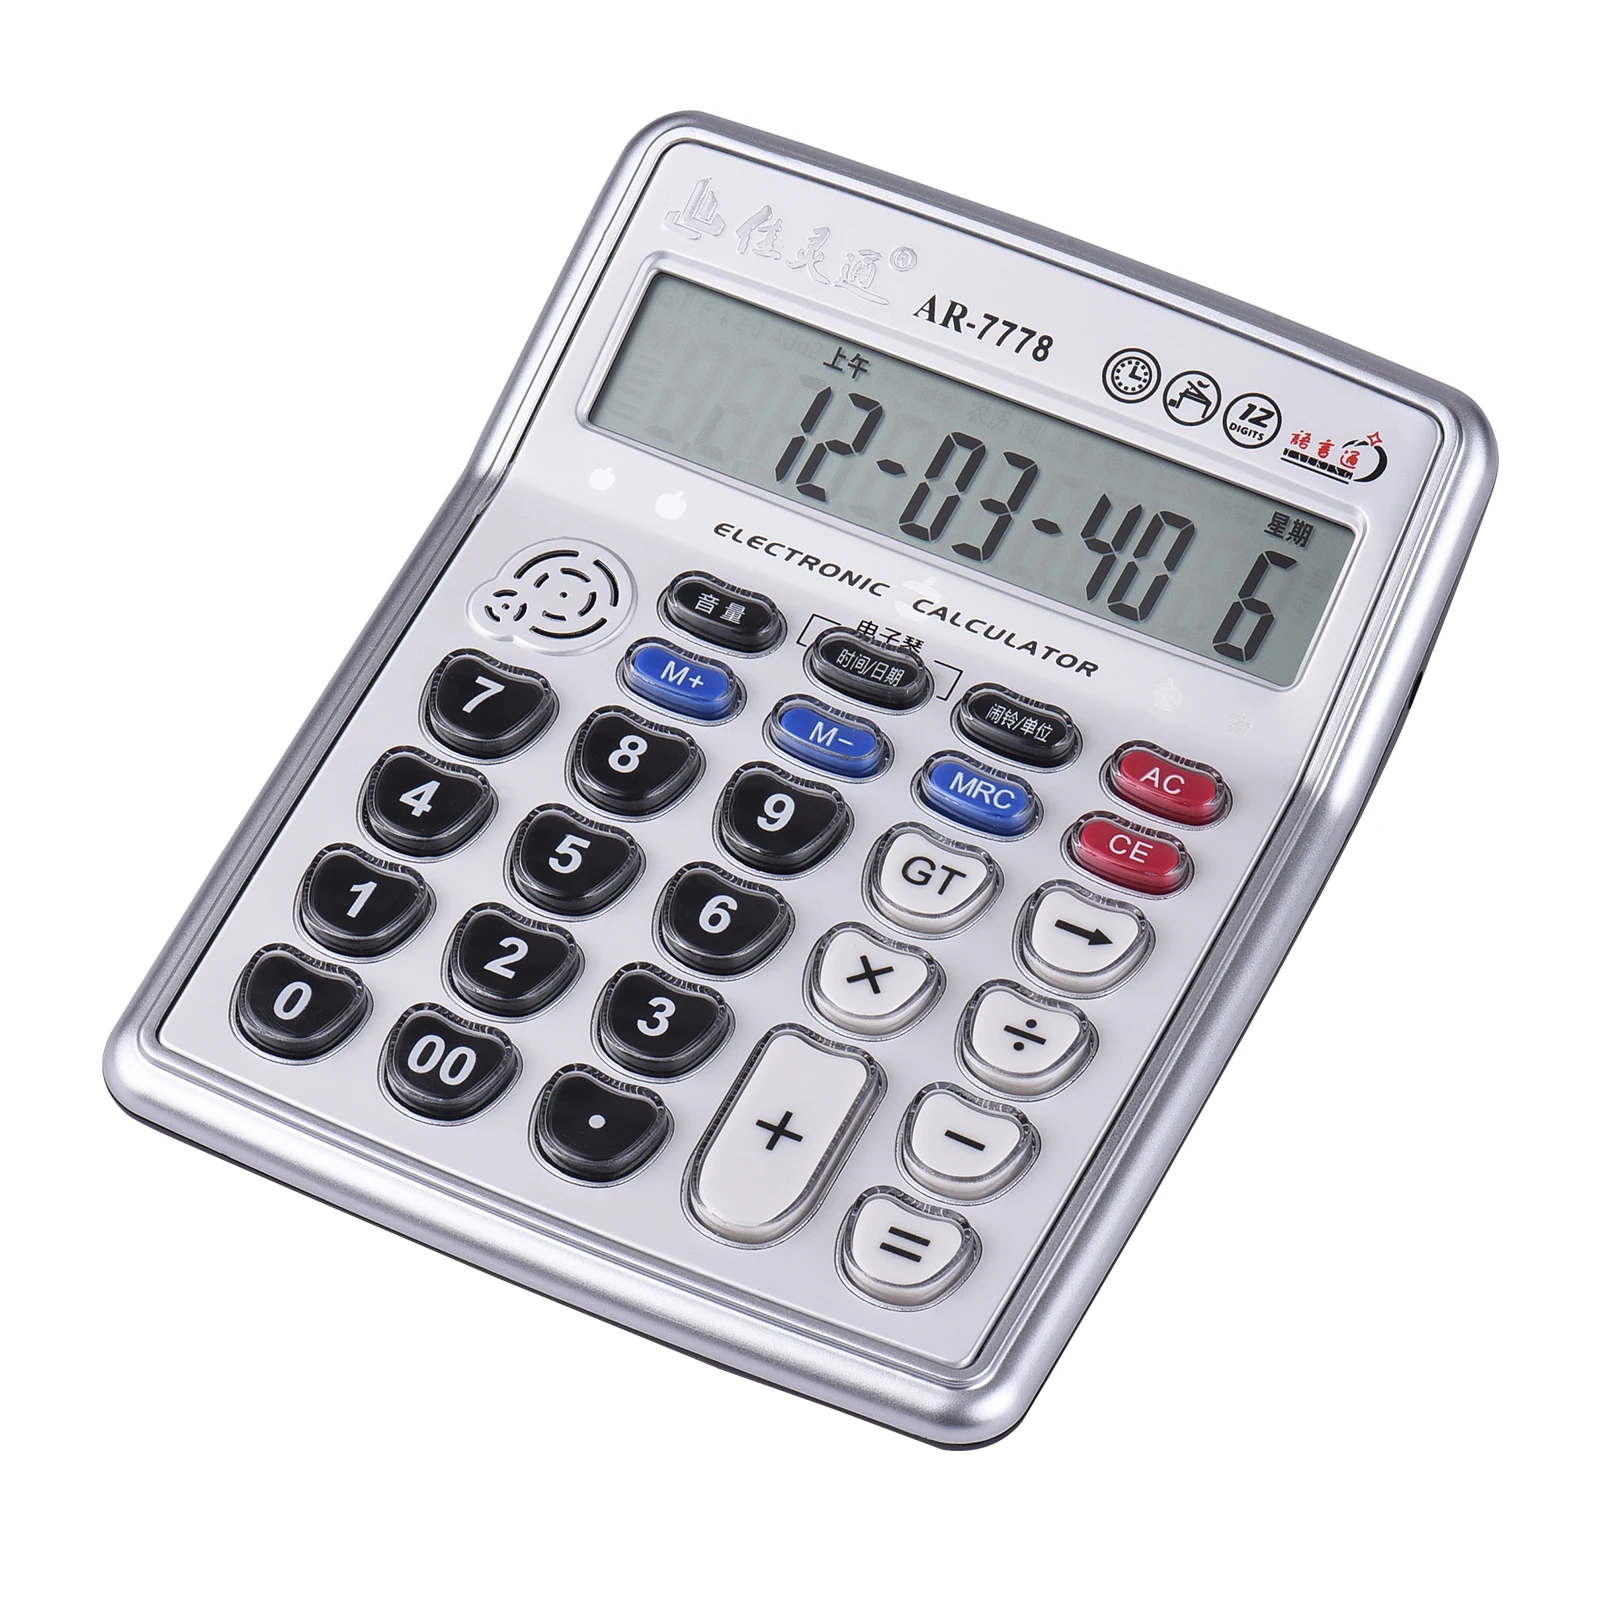 Musical Desktop Calculator 12-Digits LCD Display Electronic Calculator Counter Big Buttons Time Date Show Alarm Clock Function